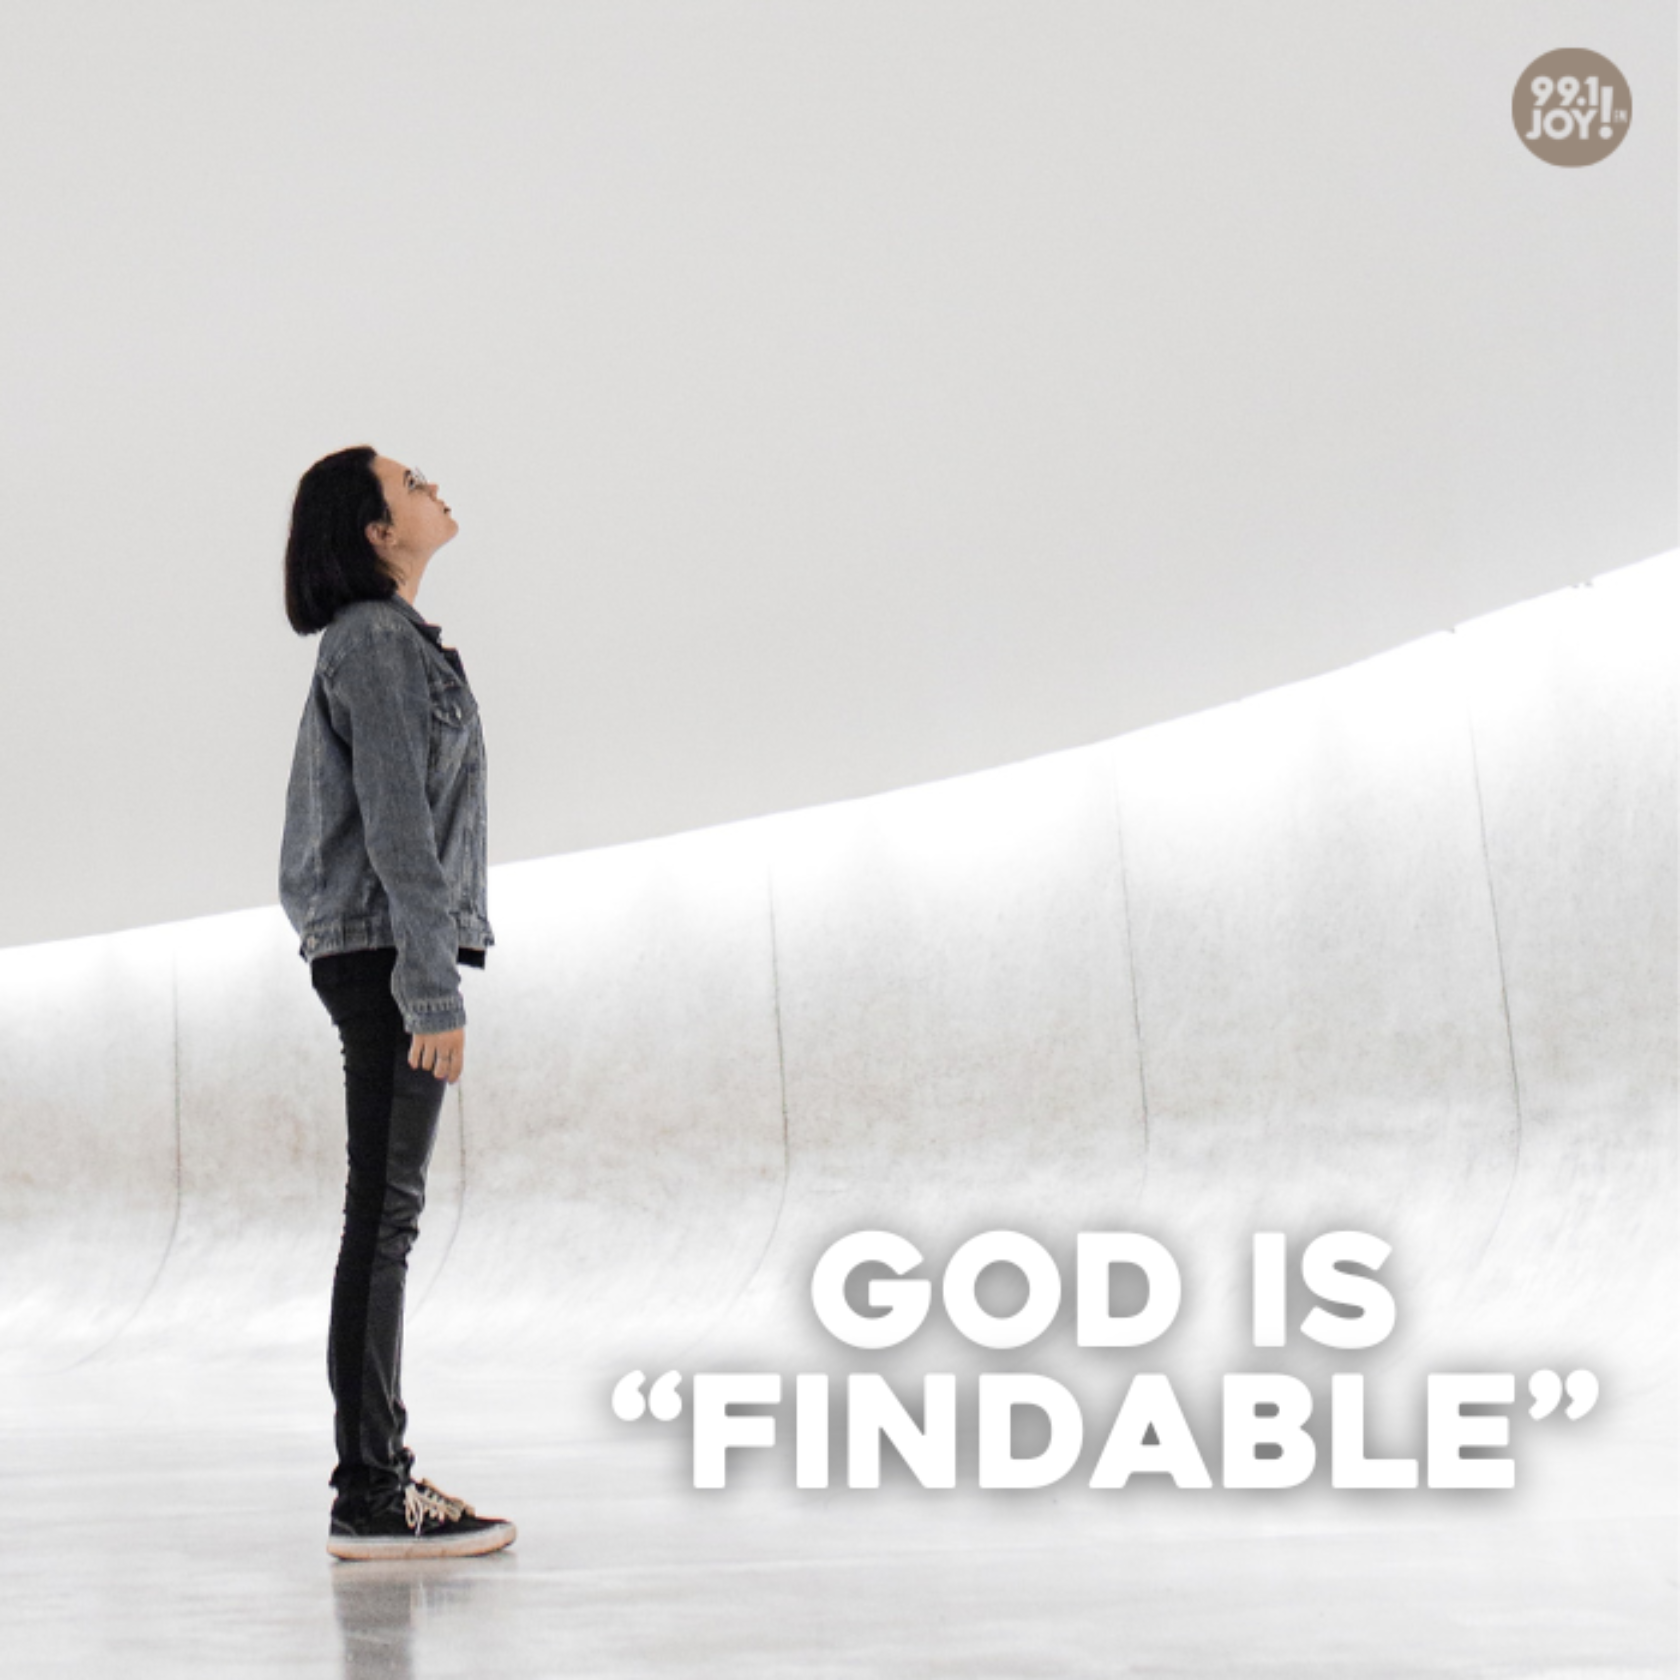 God Is “Findable”